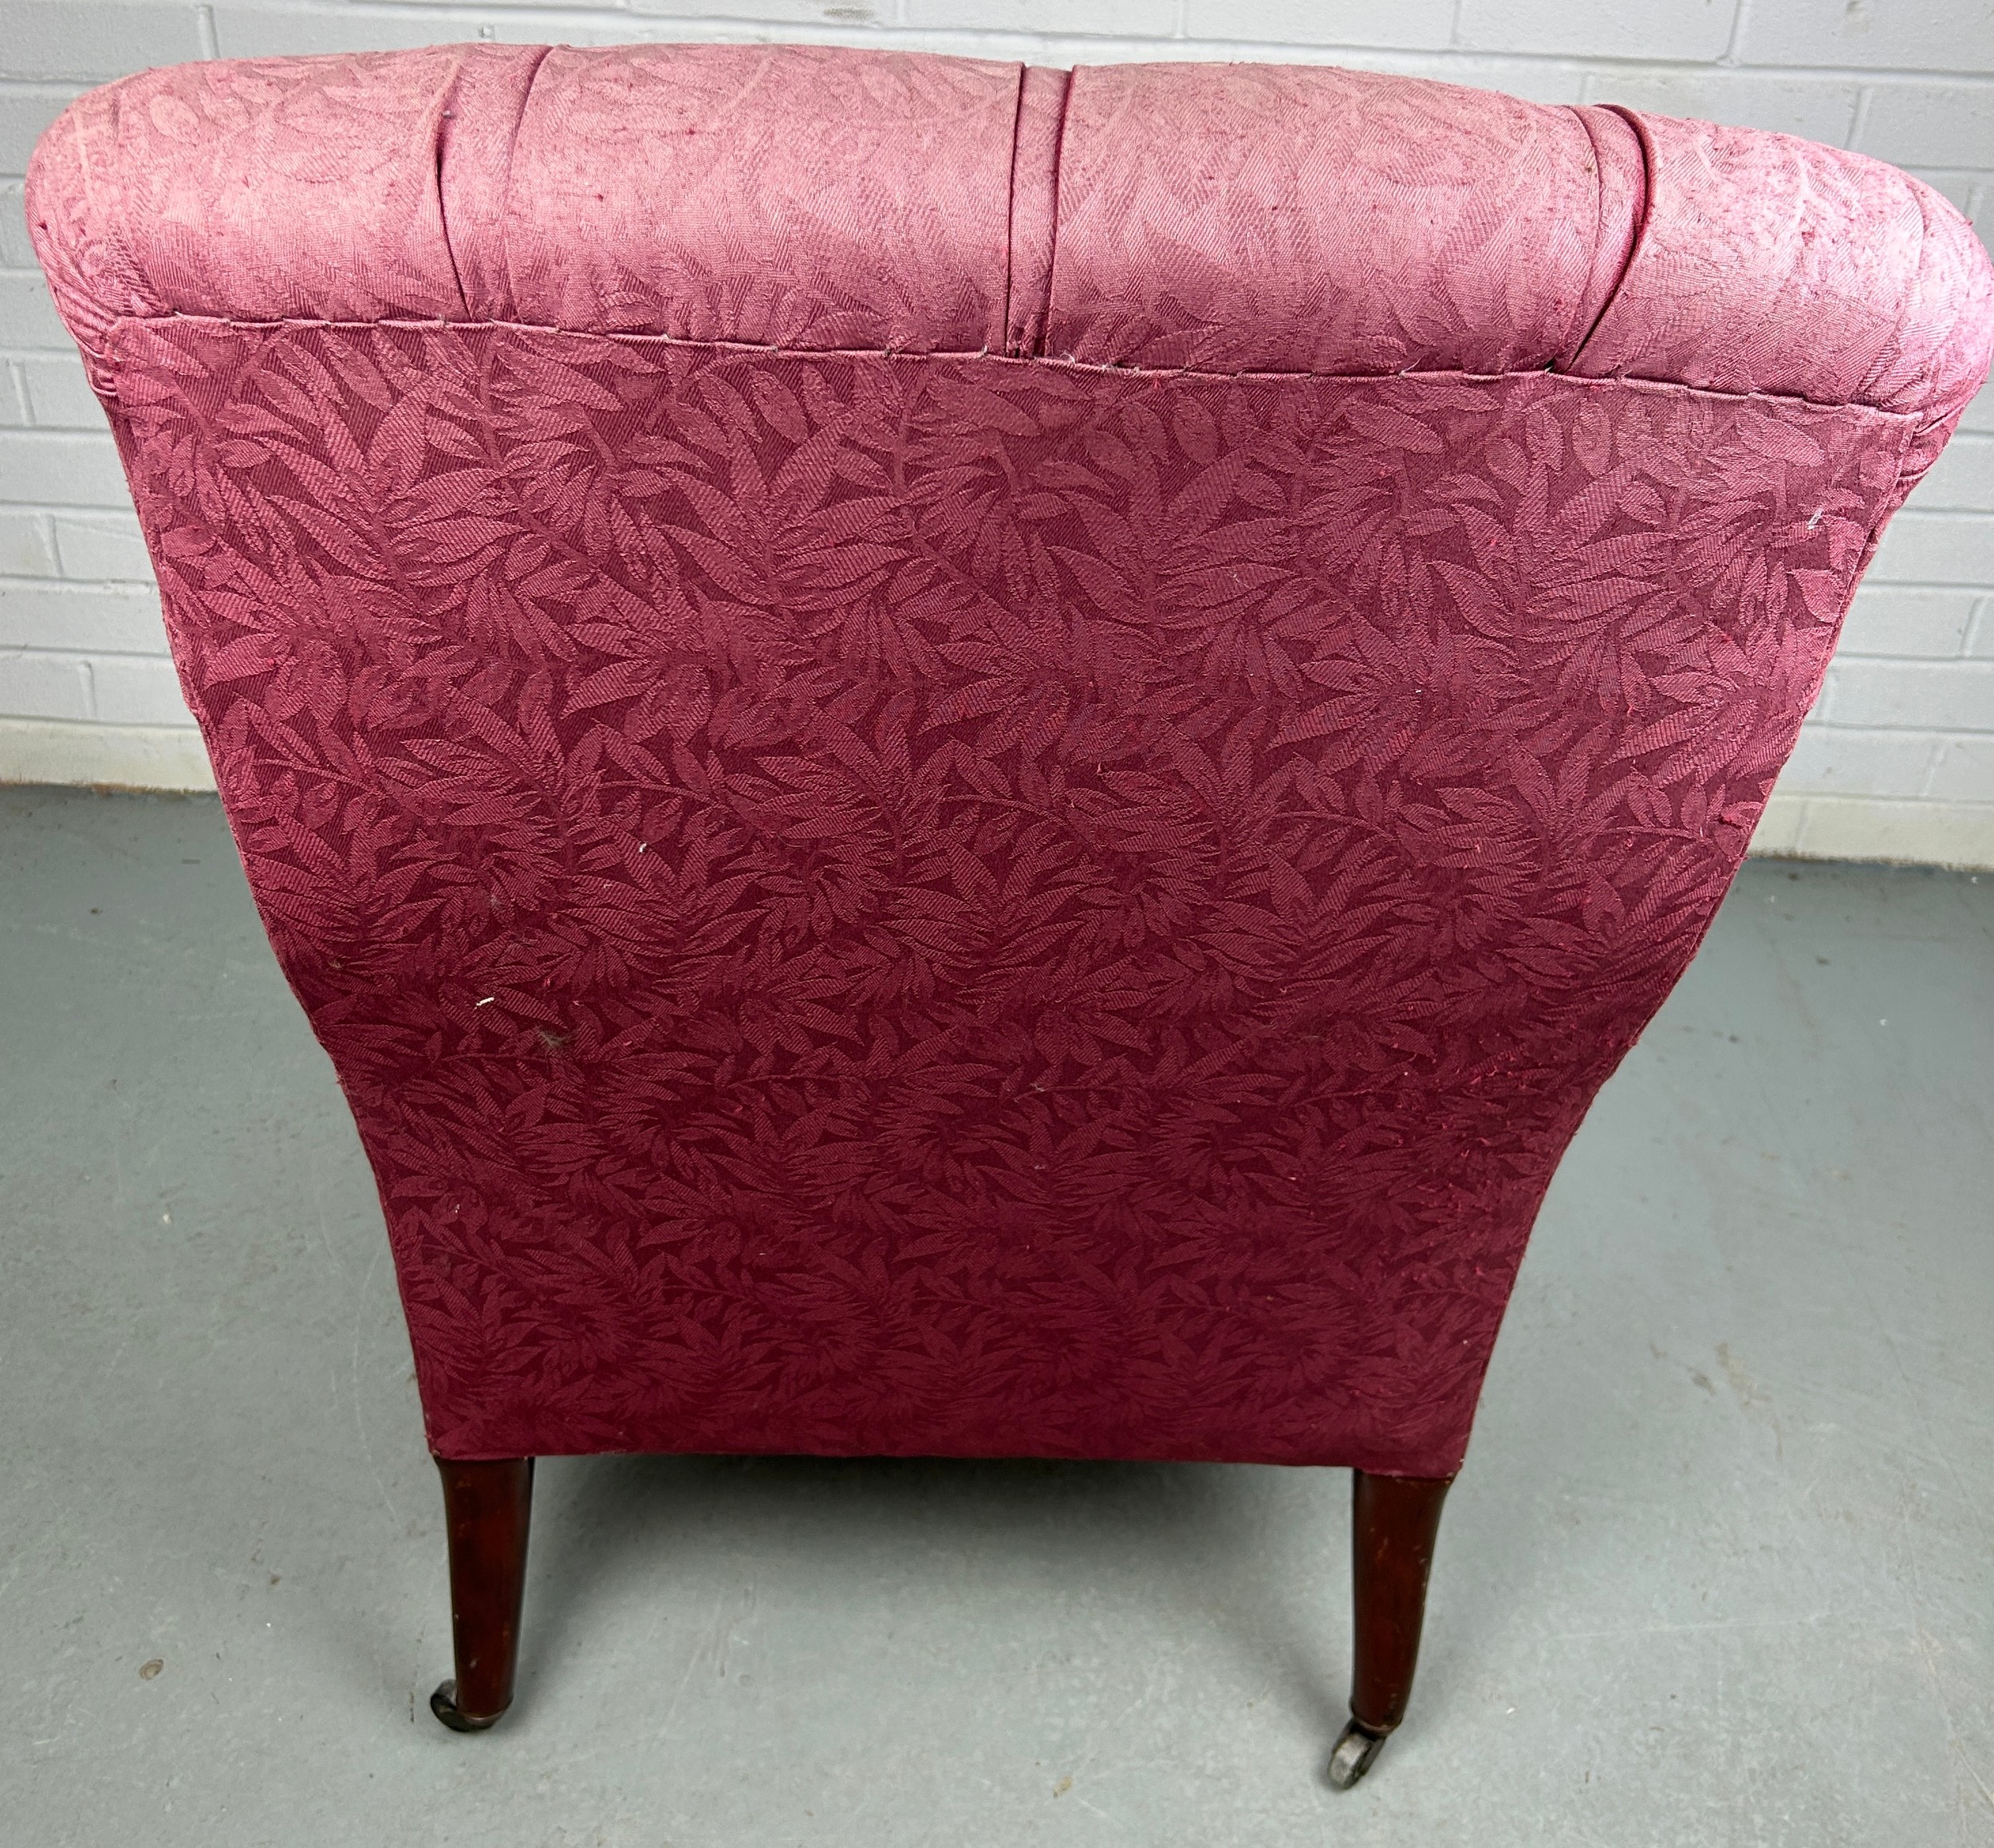 A VICTORIAN BUTTON BACK ARMCHAIR IN THE MANNER OF HOWARD AND SONS, Upholstered in raspberry coloured - Image 5 of 5